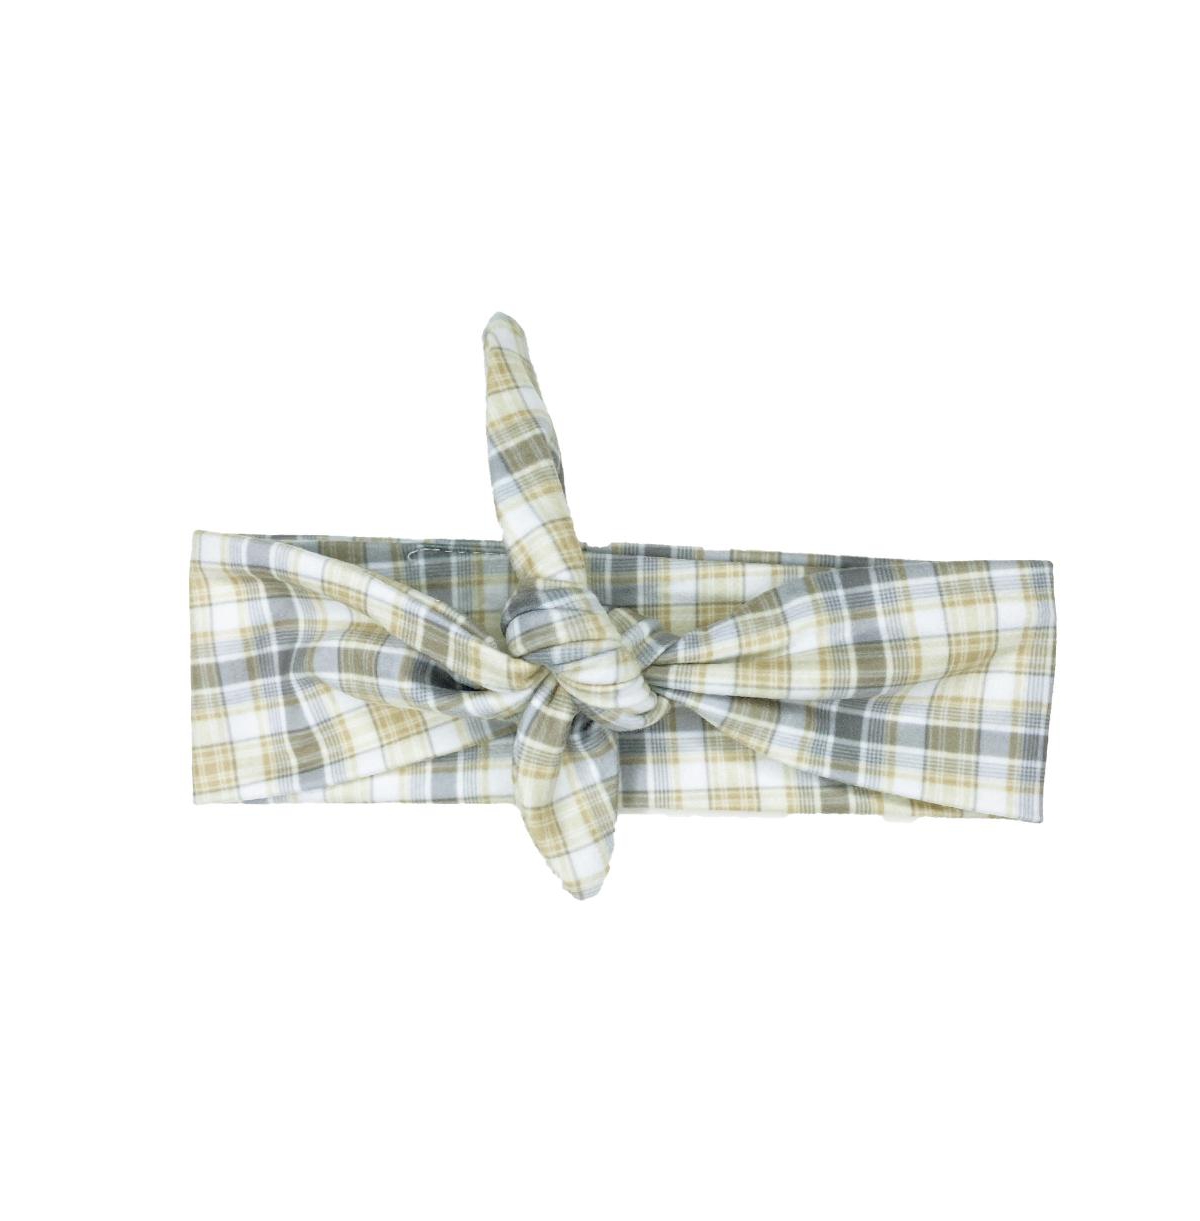 Headbands Of Hope Tan Plaid Knotted Headband Ties For Girls